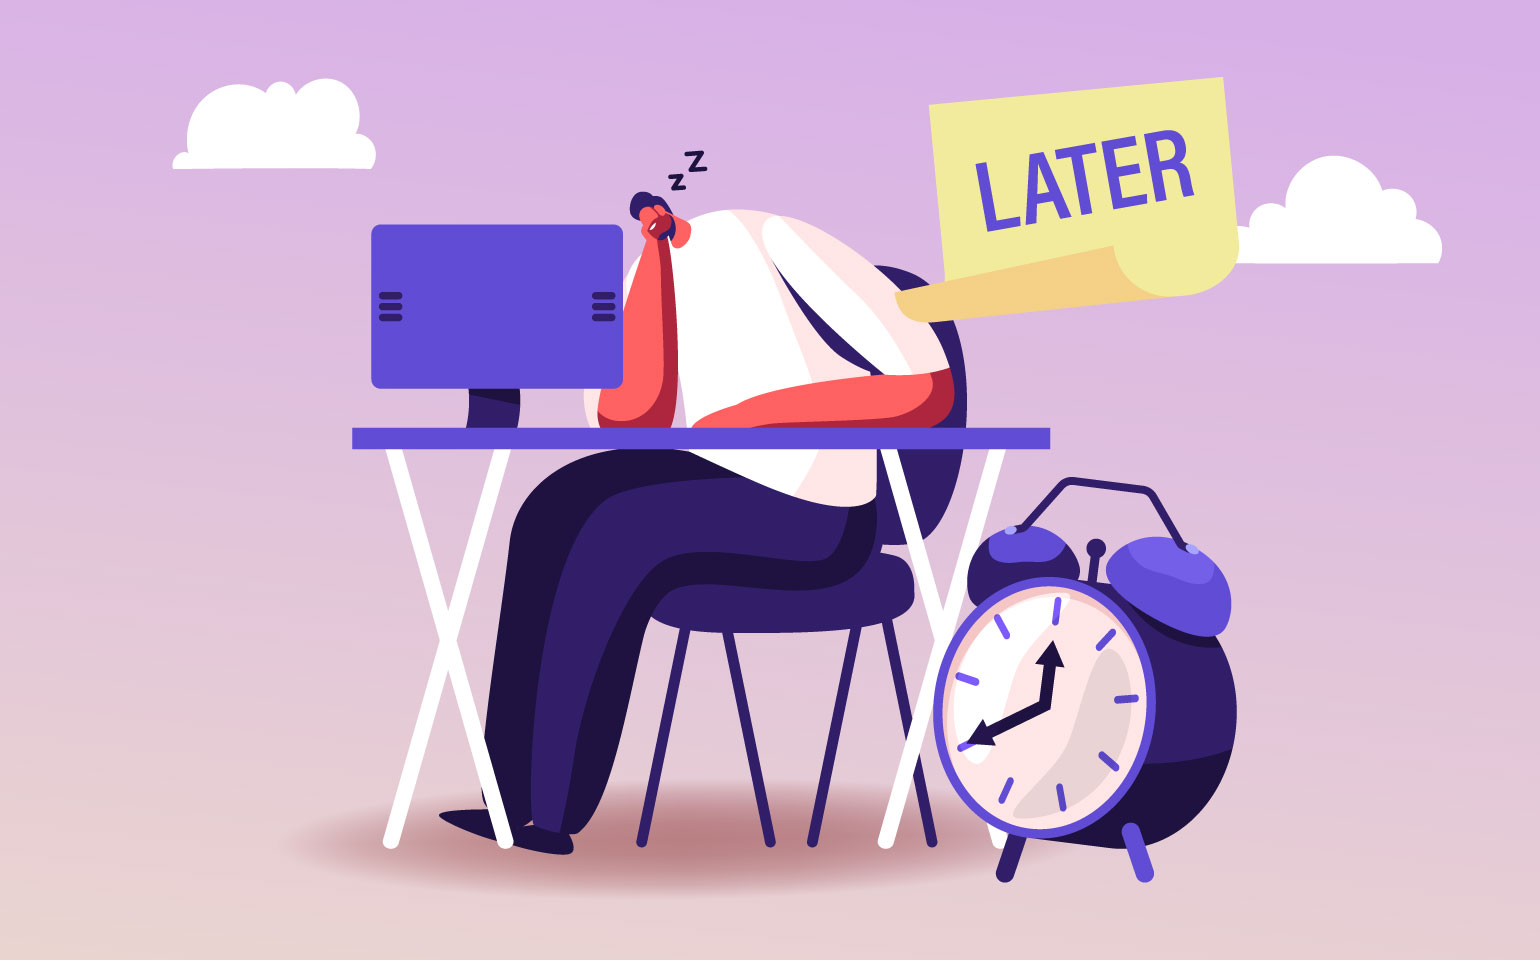 A person sits at a desk with the word "LATER" above it and a clock to represent procrastination.